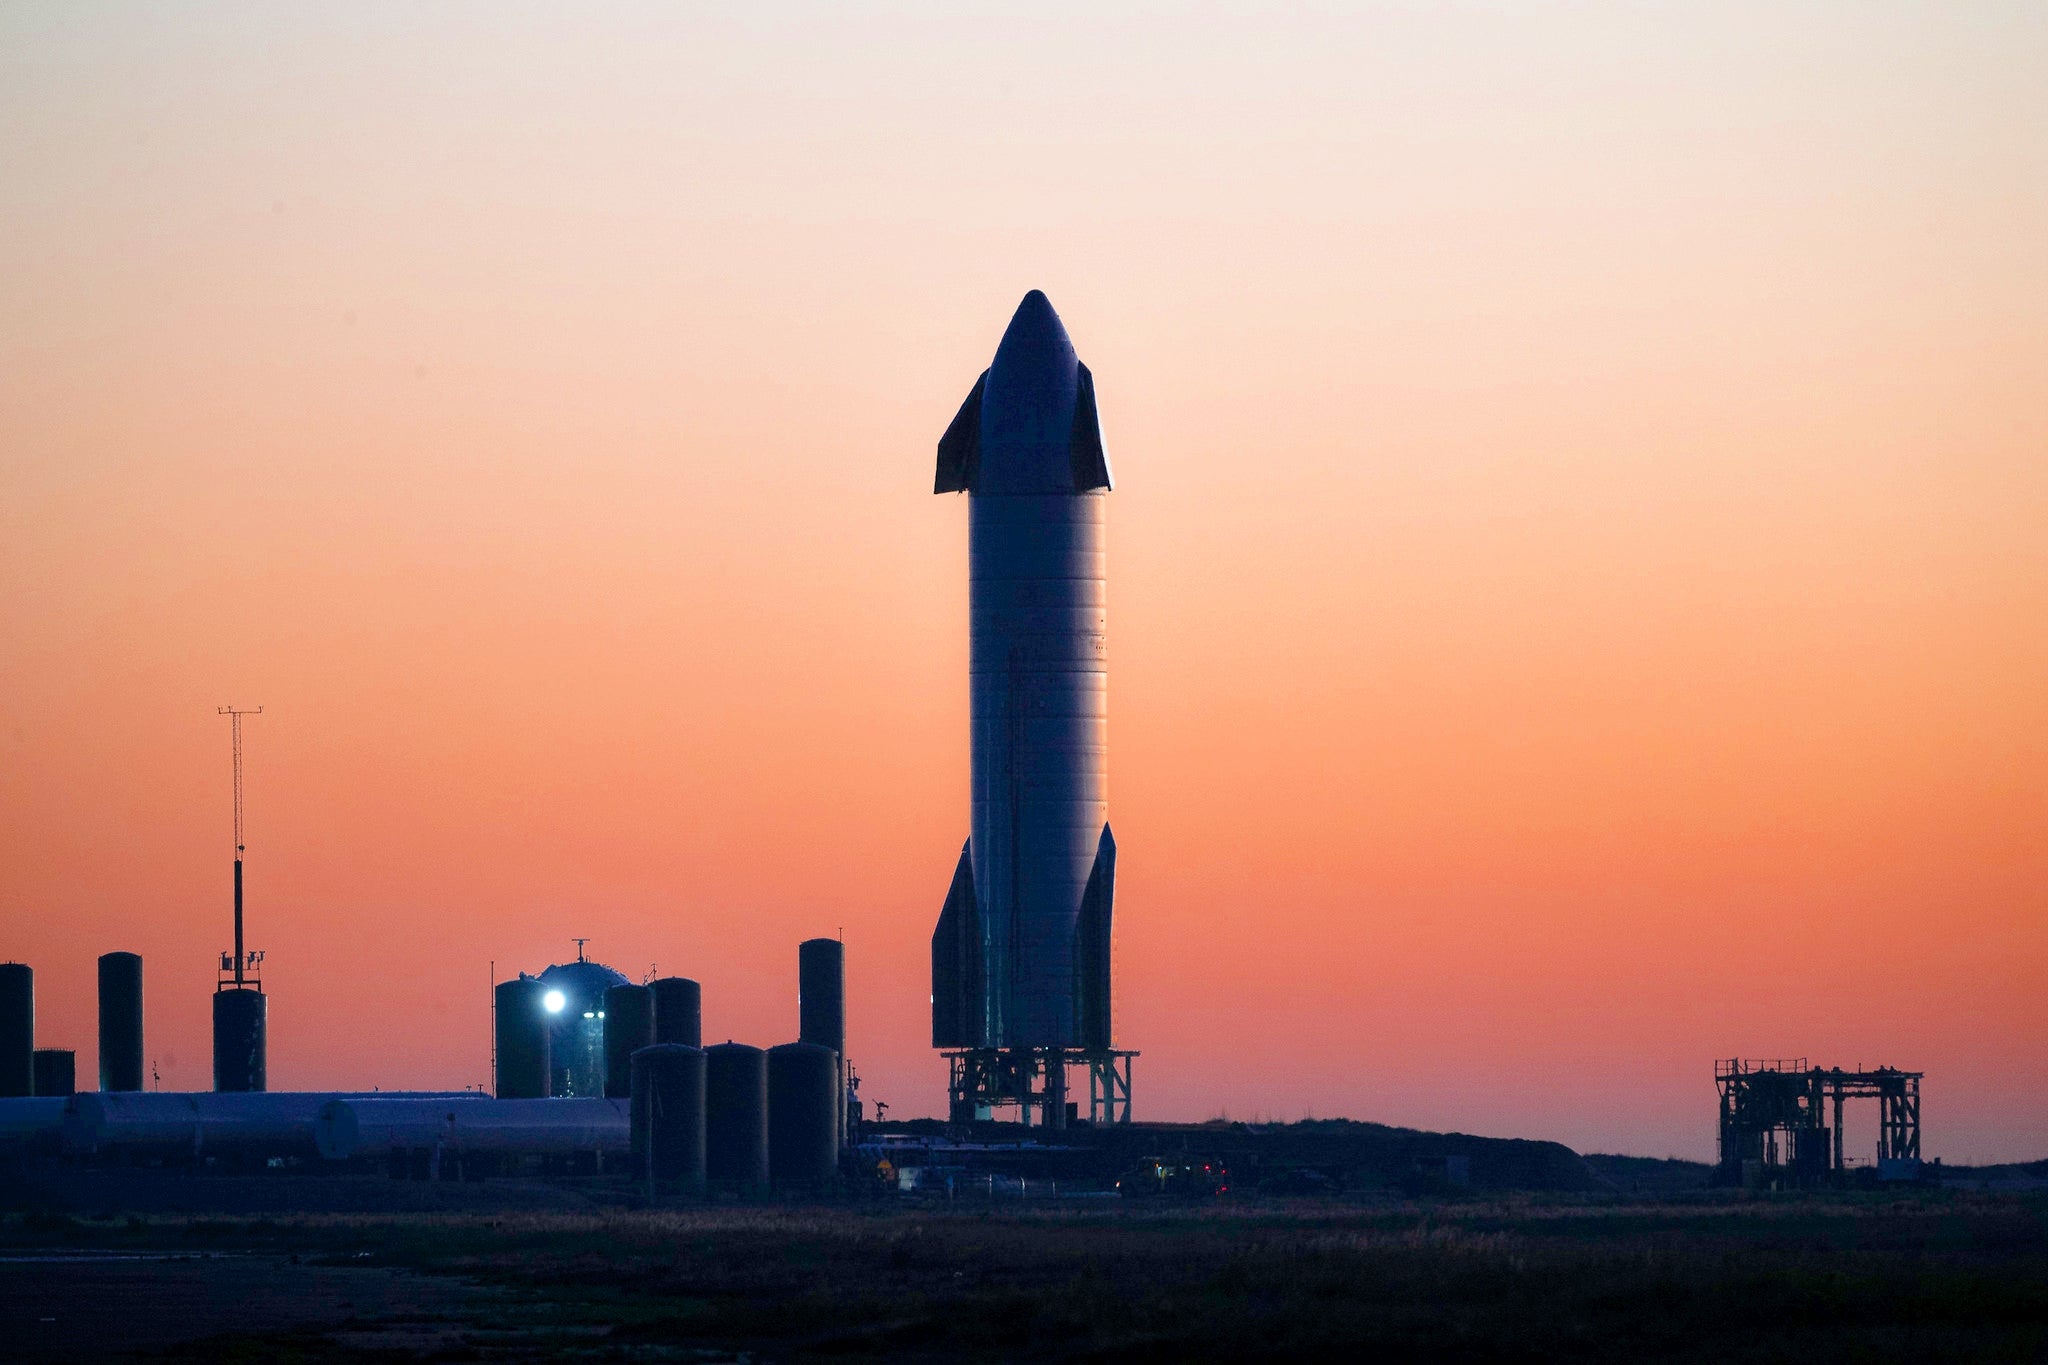 Excitement builds over Starship SN9's upcoming flight as SpaceX awaits FAA approval